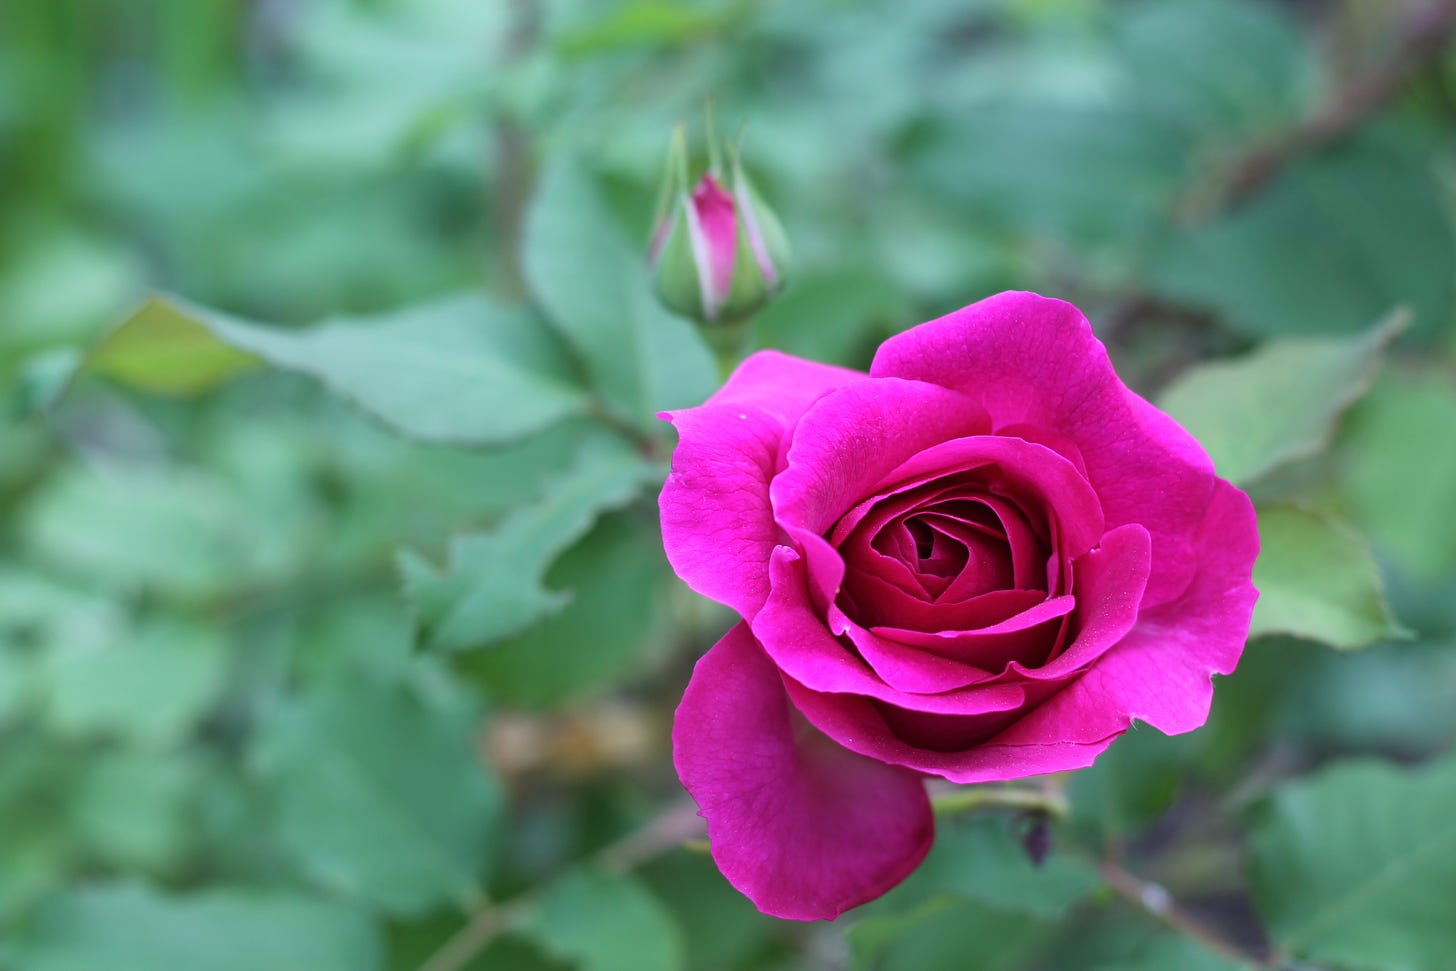 a magenta pink rose, just opening up, with blurry foliage in the background